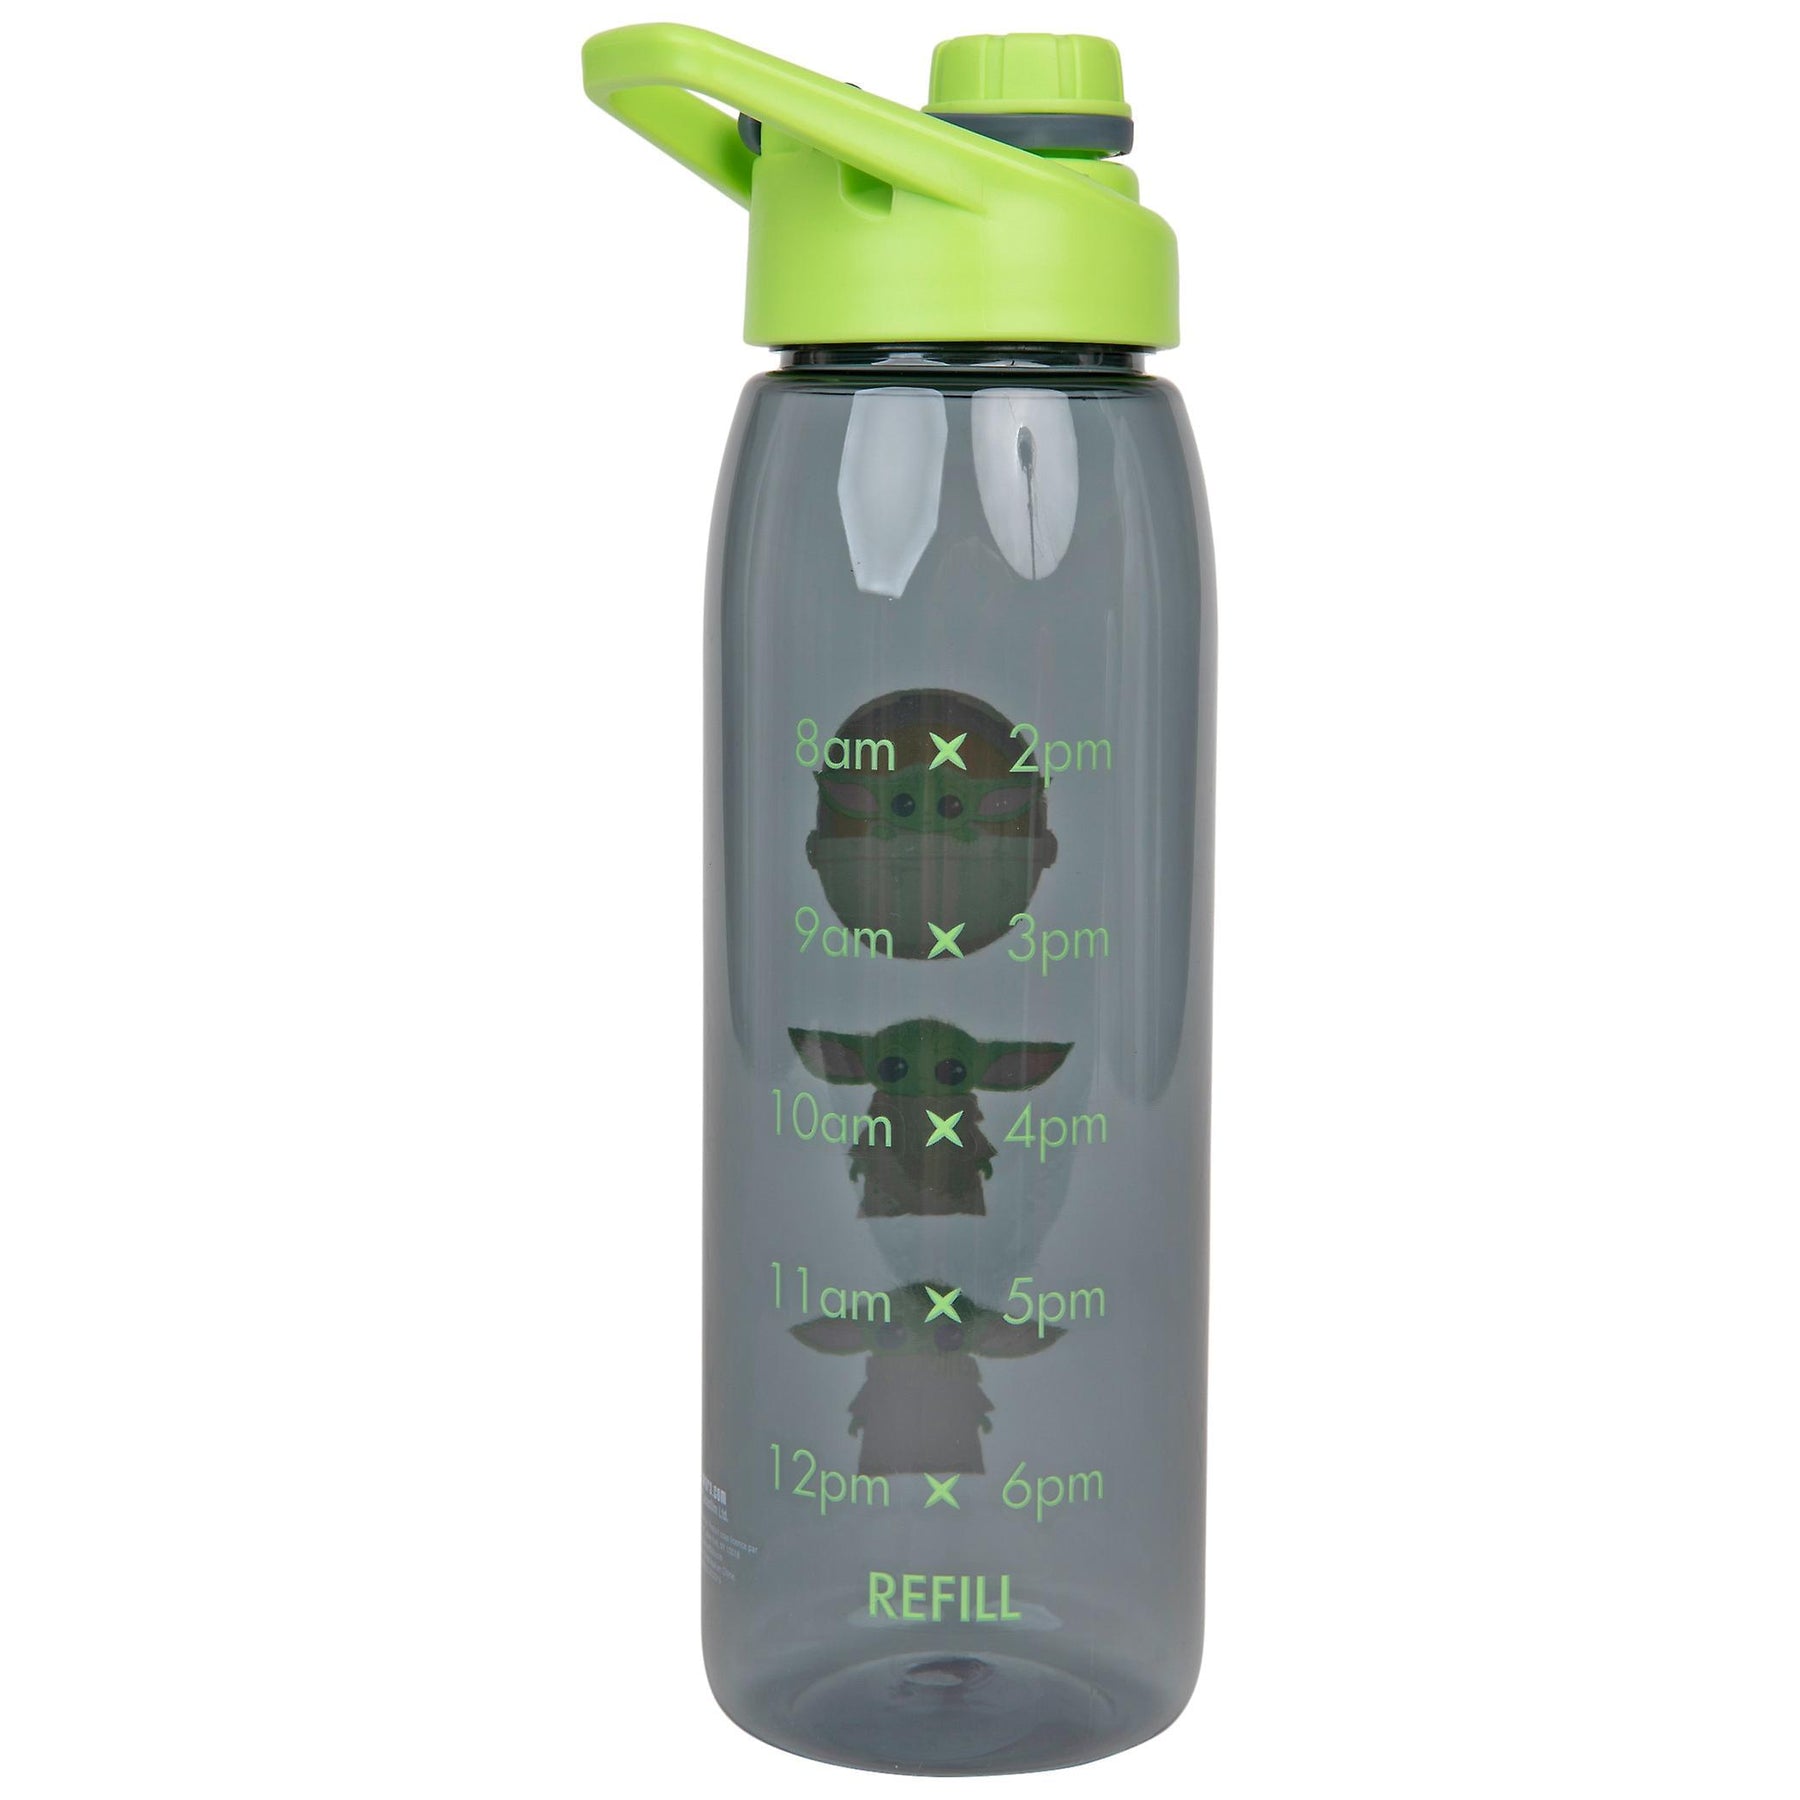 Star Wars: The Mandalorian Grogu Water Bottle With Time Marker | Holds 28 Ounces